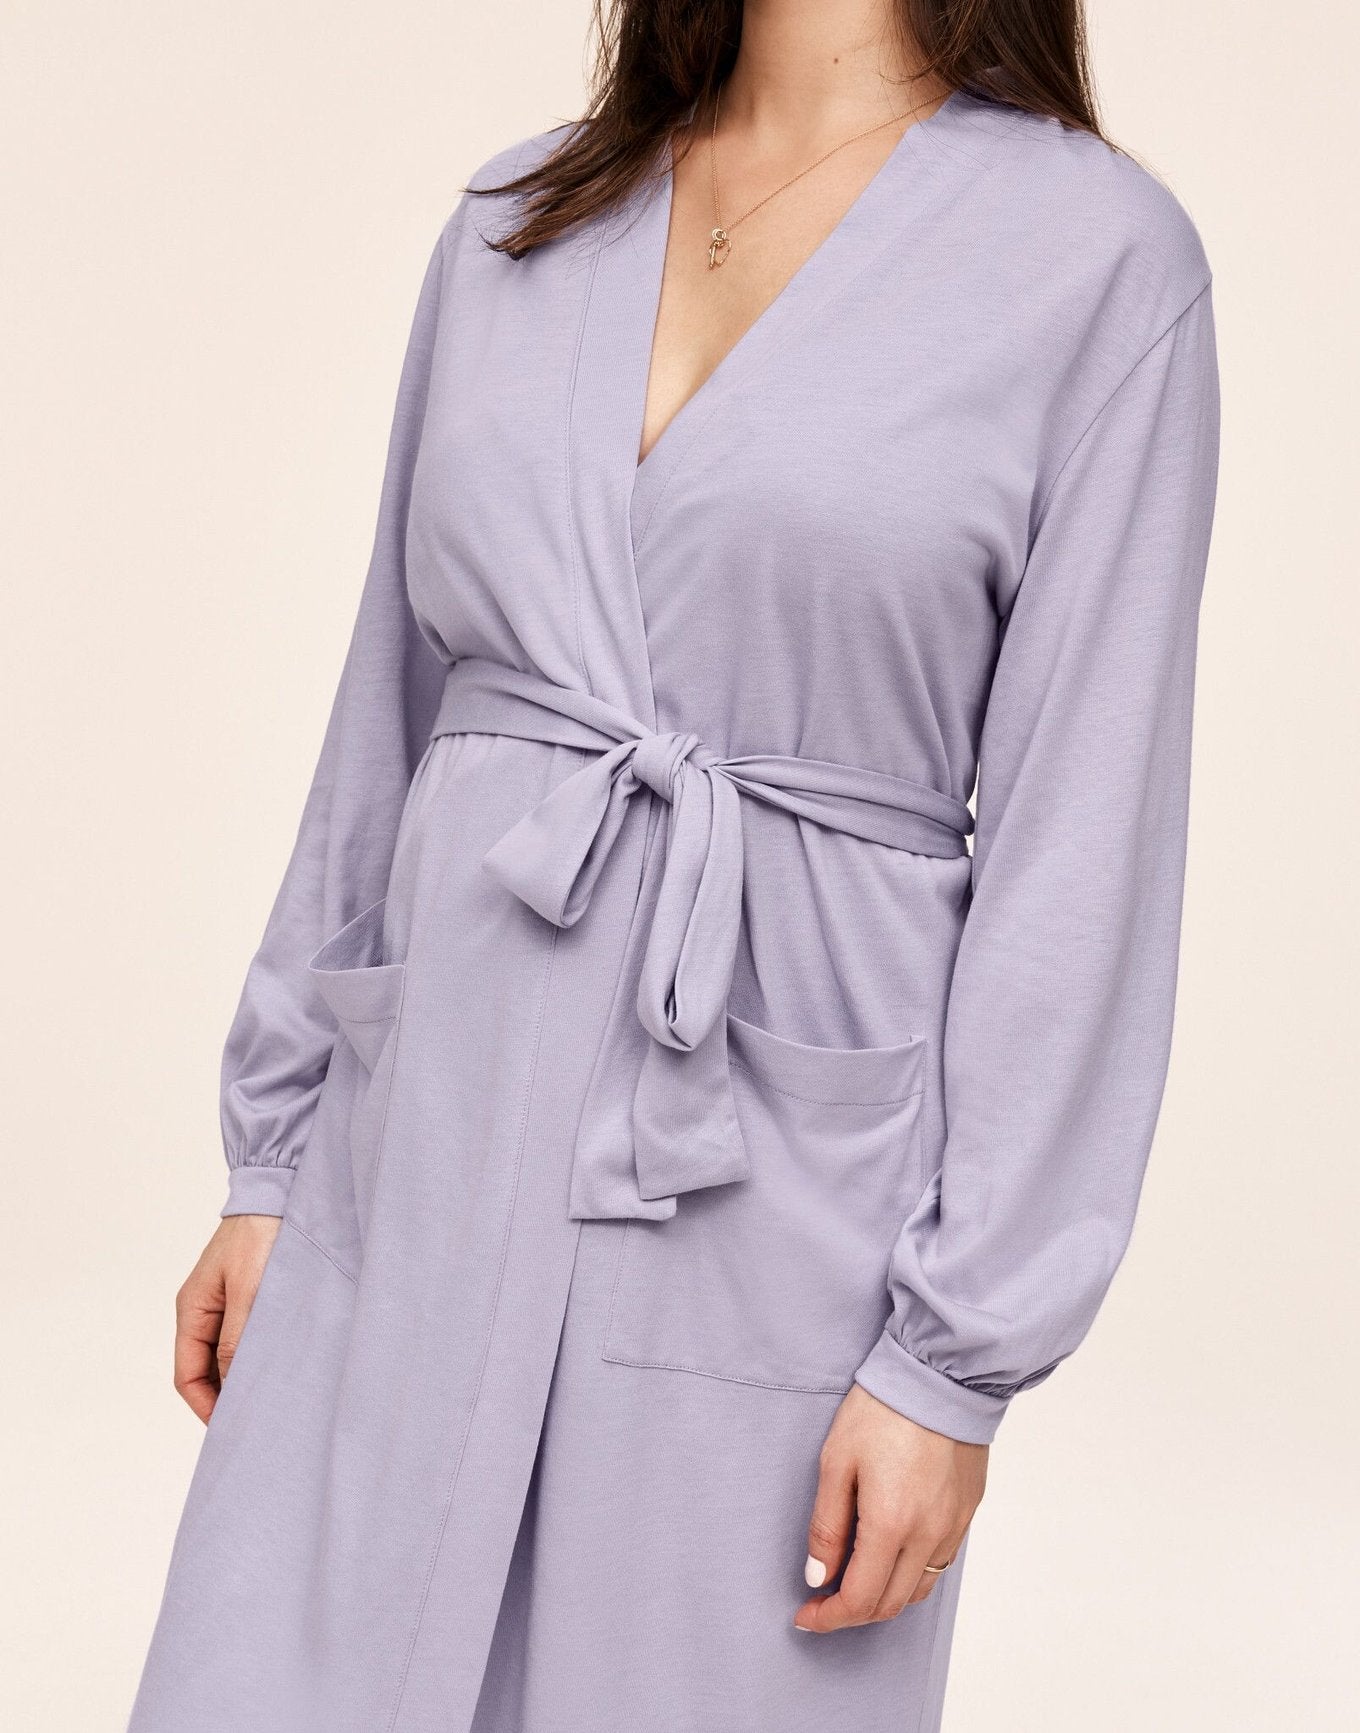 Belabumbum Elle Robe Luxe Pima Cotton in color Misty Lilac and shape robe